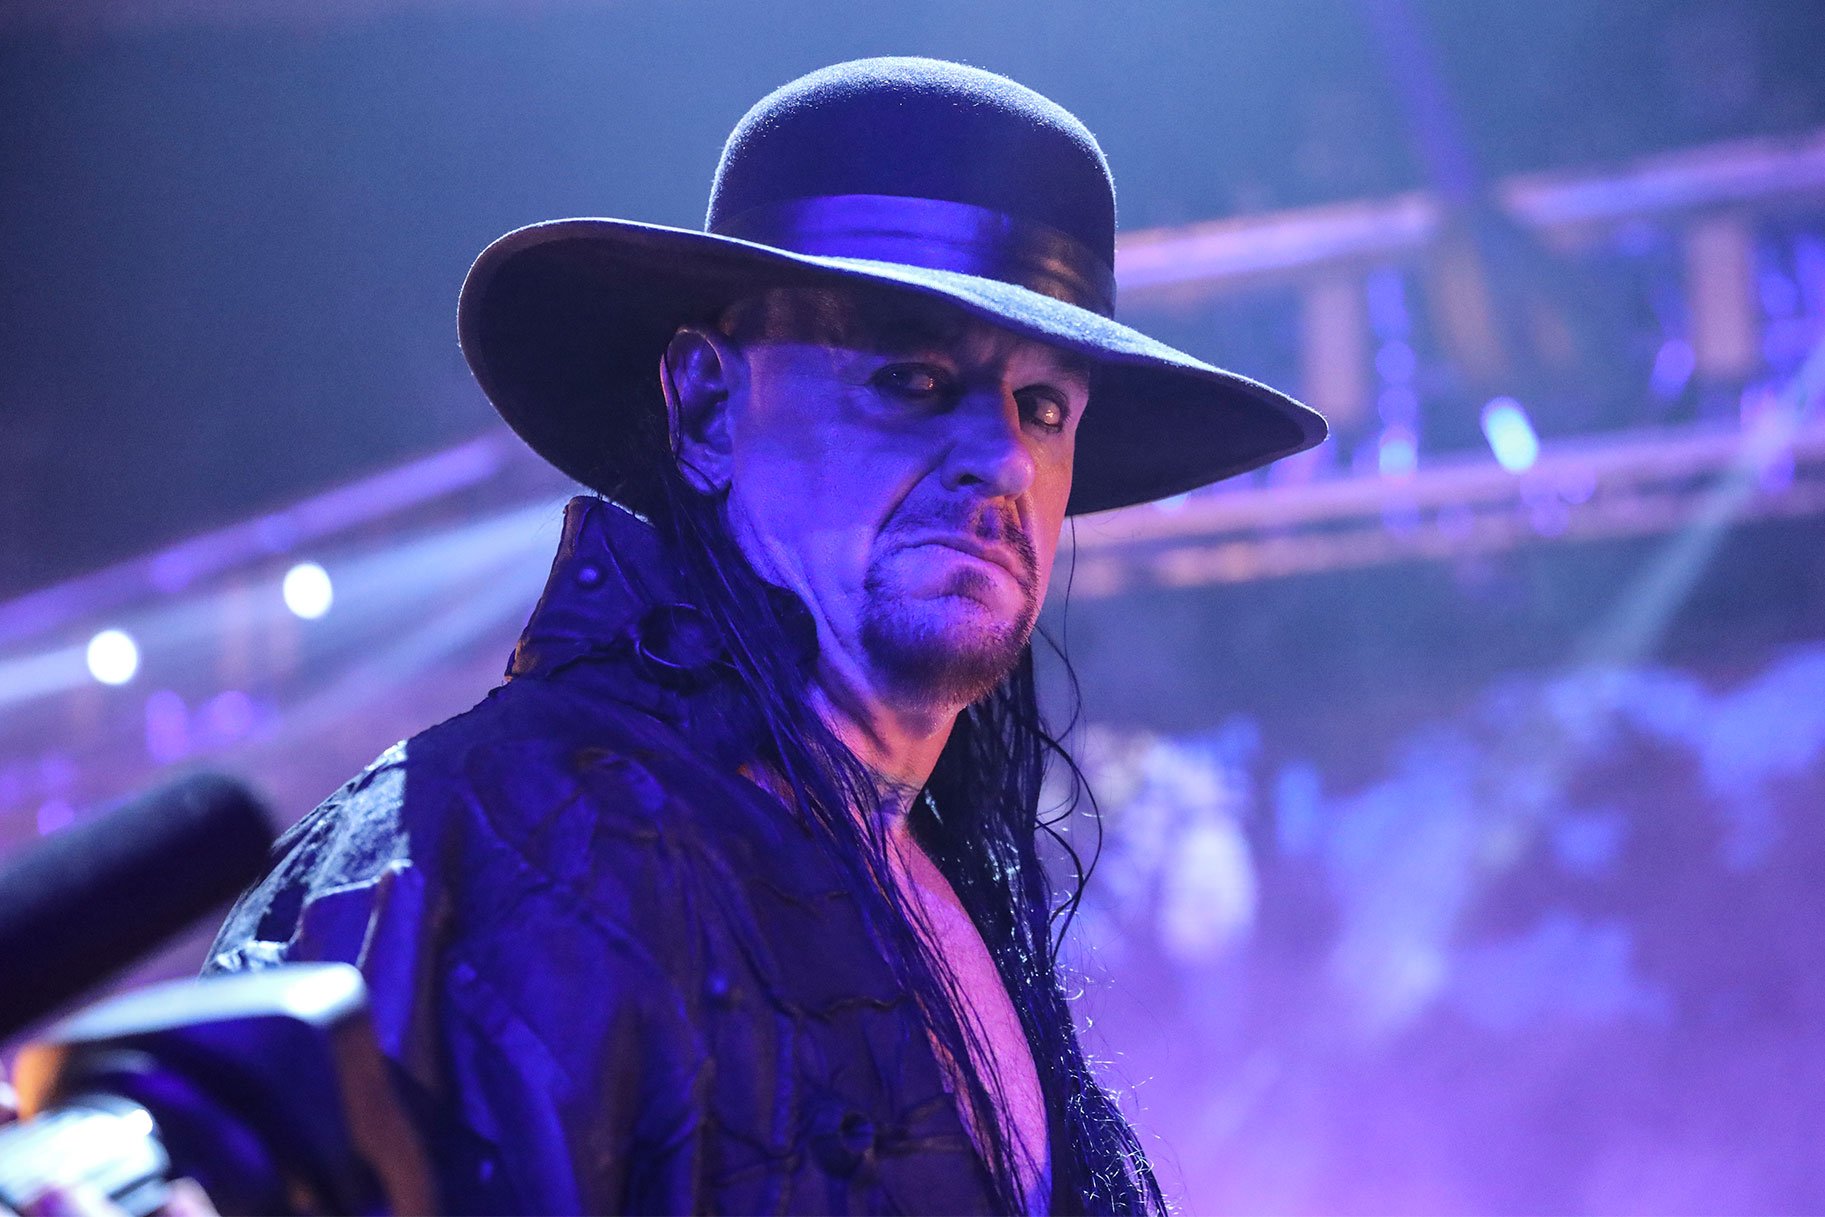 The Undertaker Makes a Trip to the WWE Warehouse, Highlighting Sheamus’ Top Hits, Details on MITB Merchandise, and More